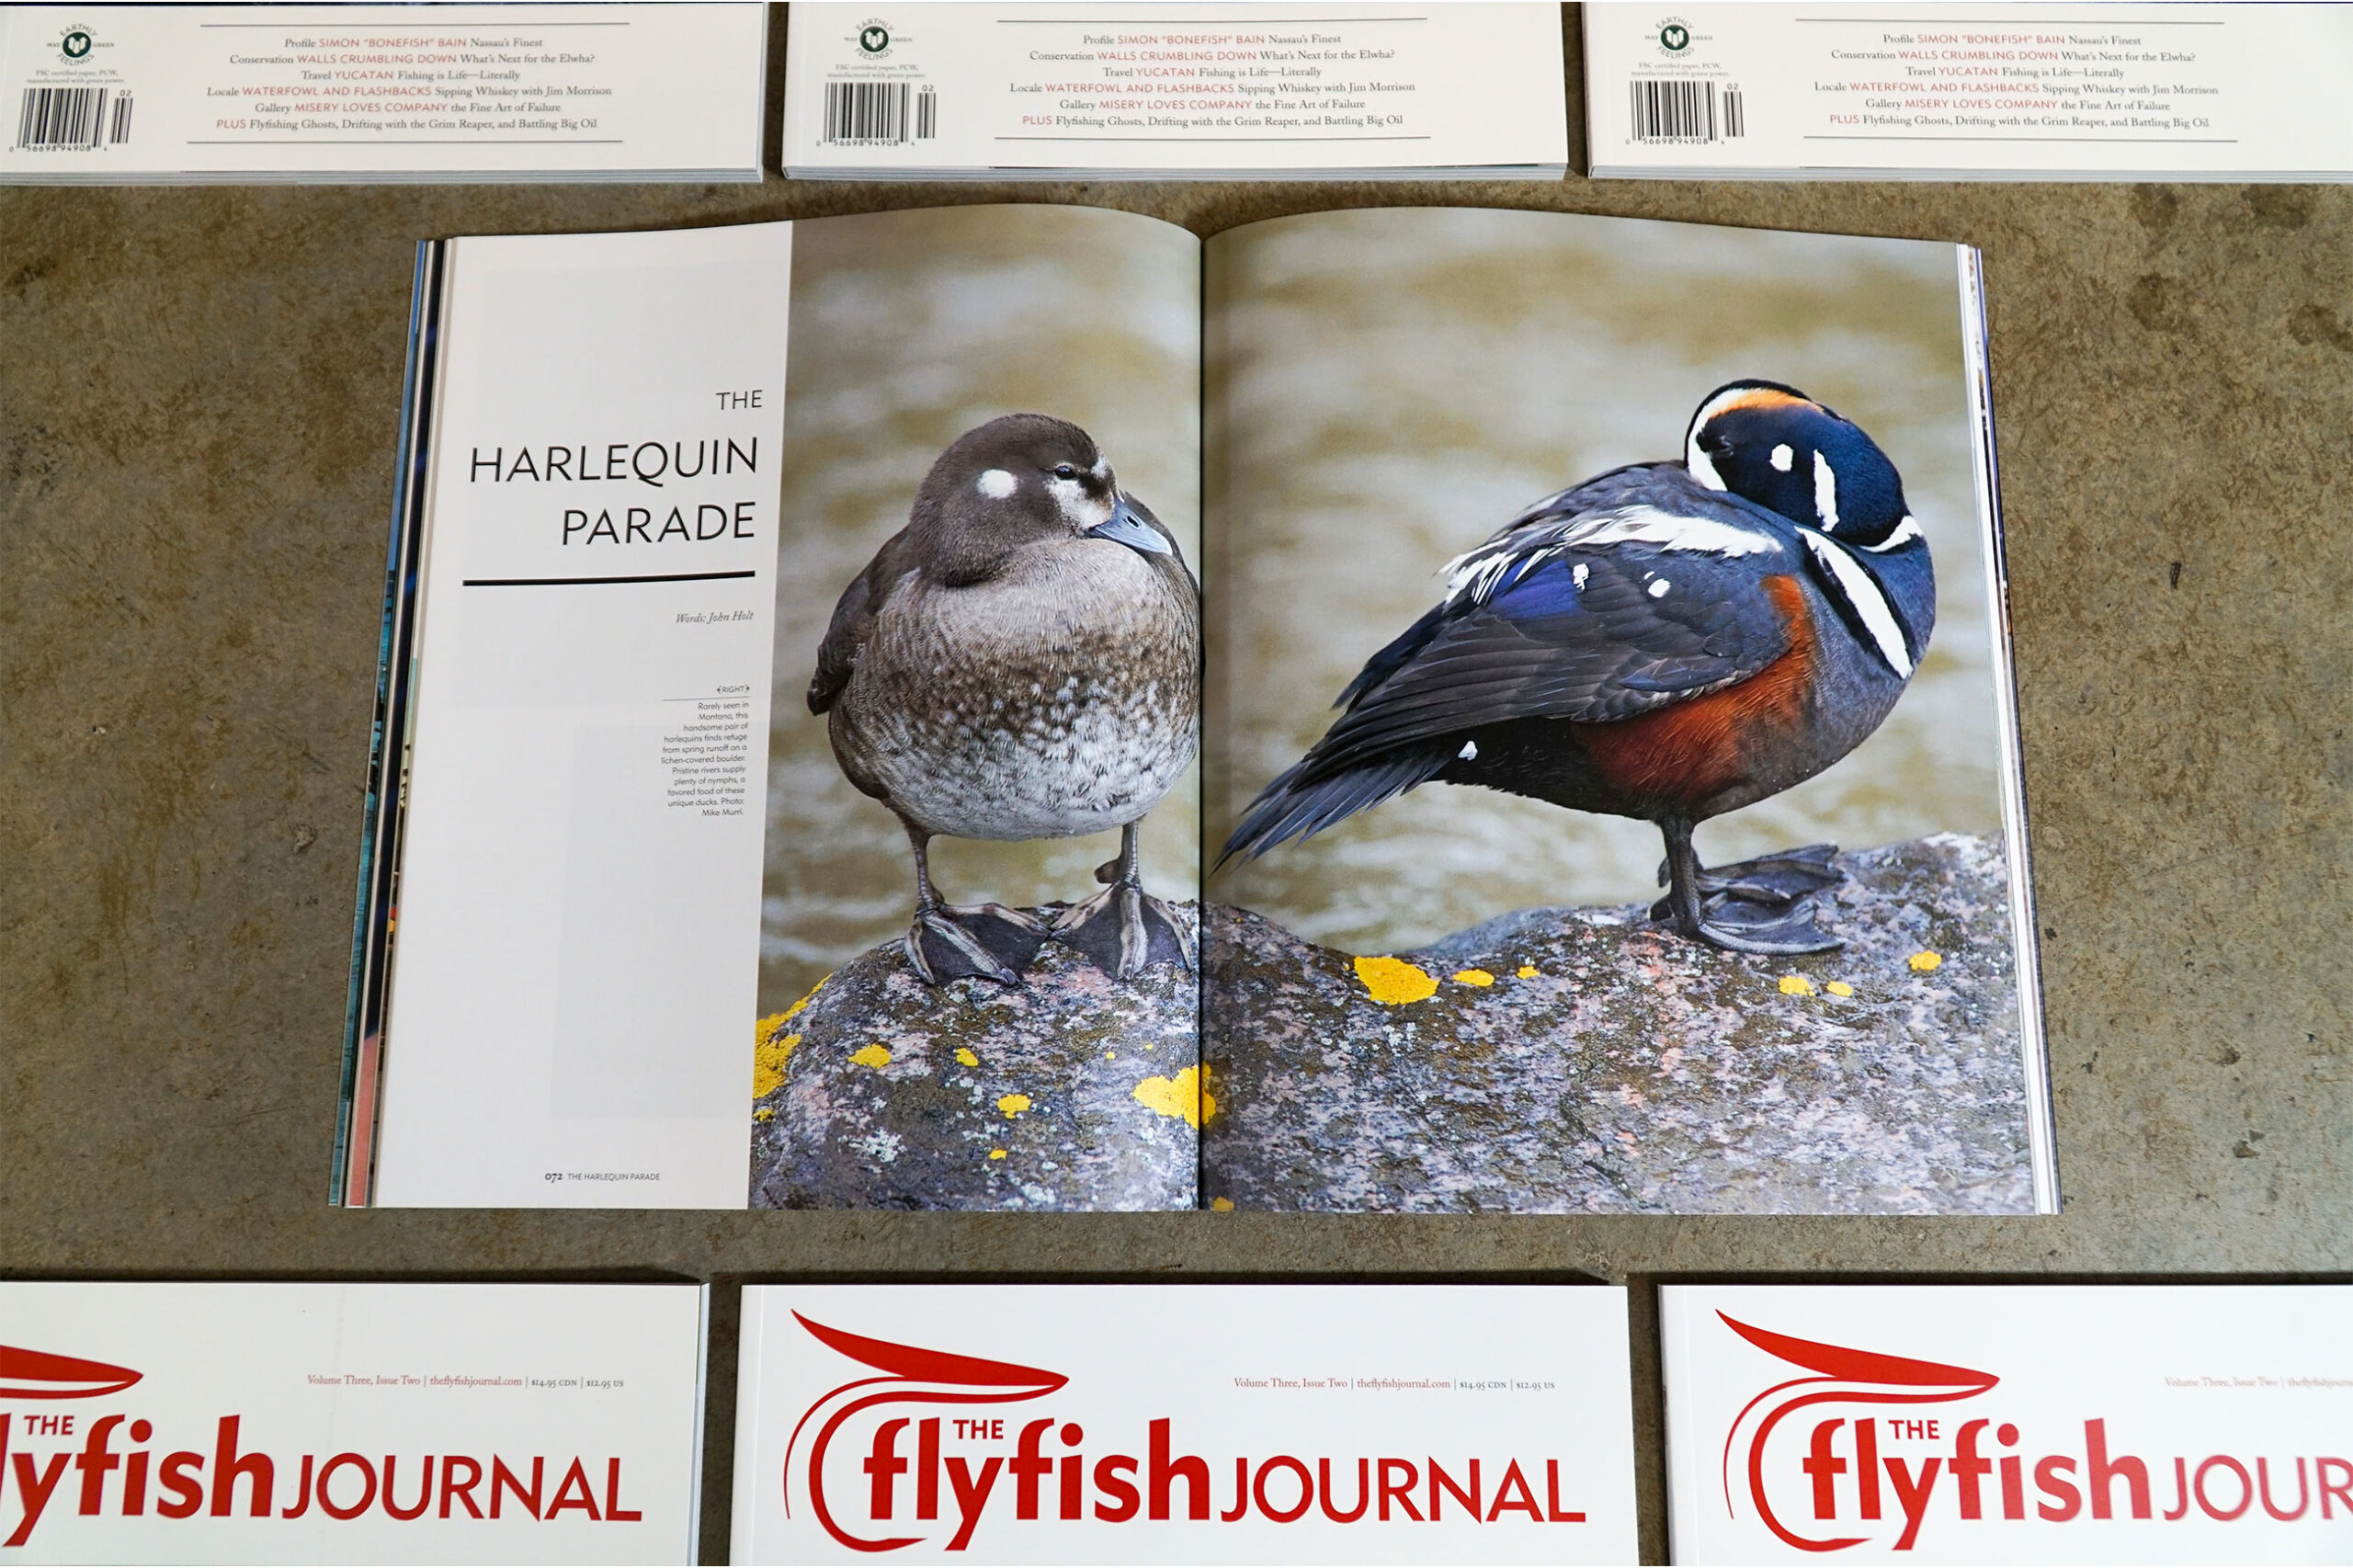 The Flyfish Journal Volume 3 Issue 2 Feature The Harlequin Parade